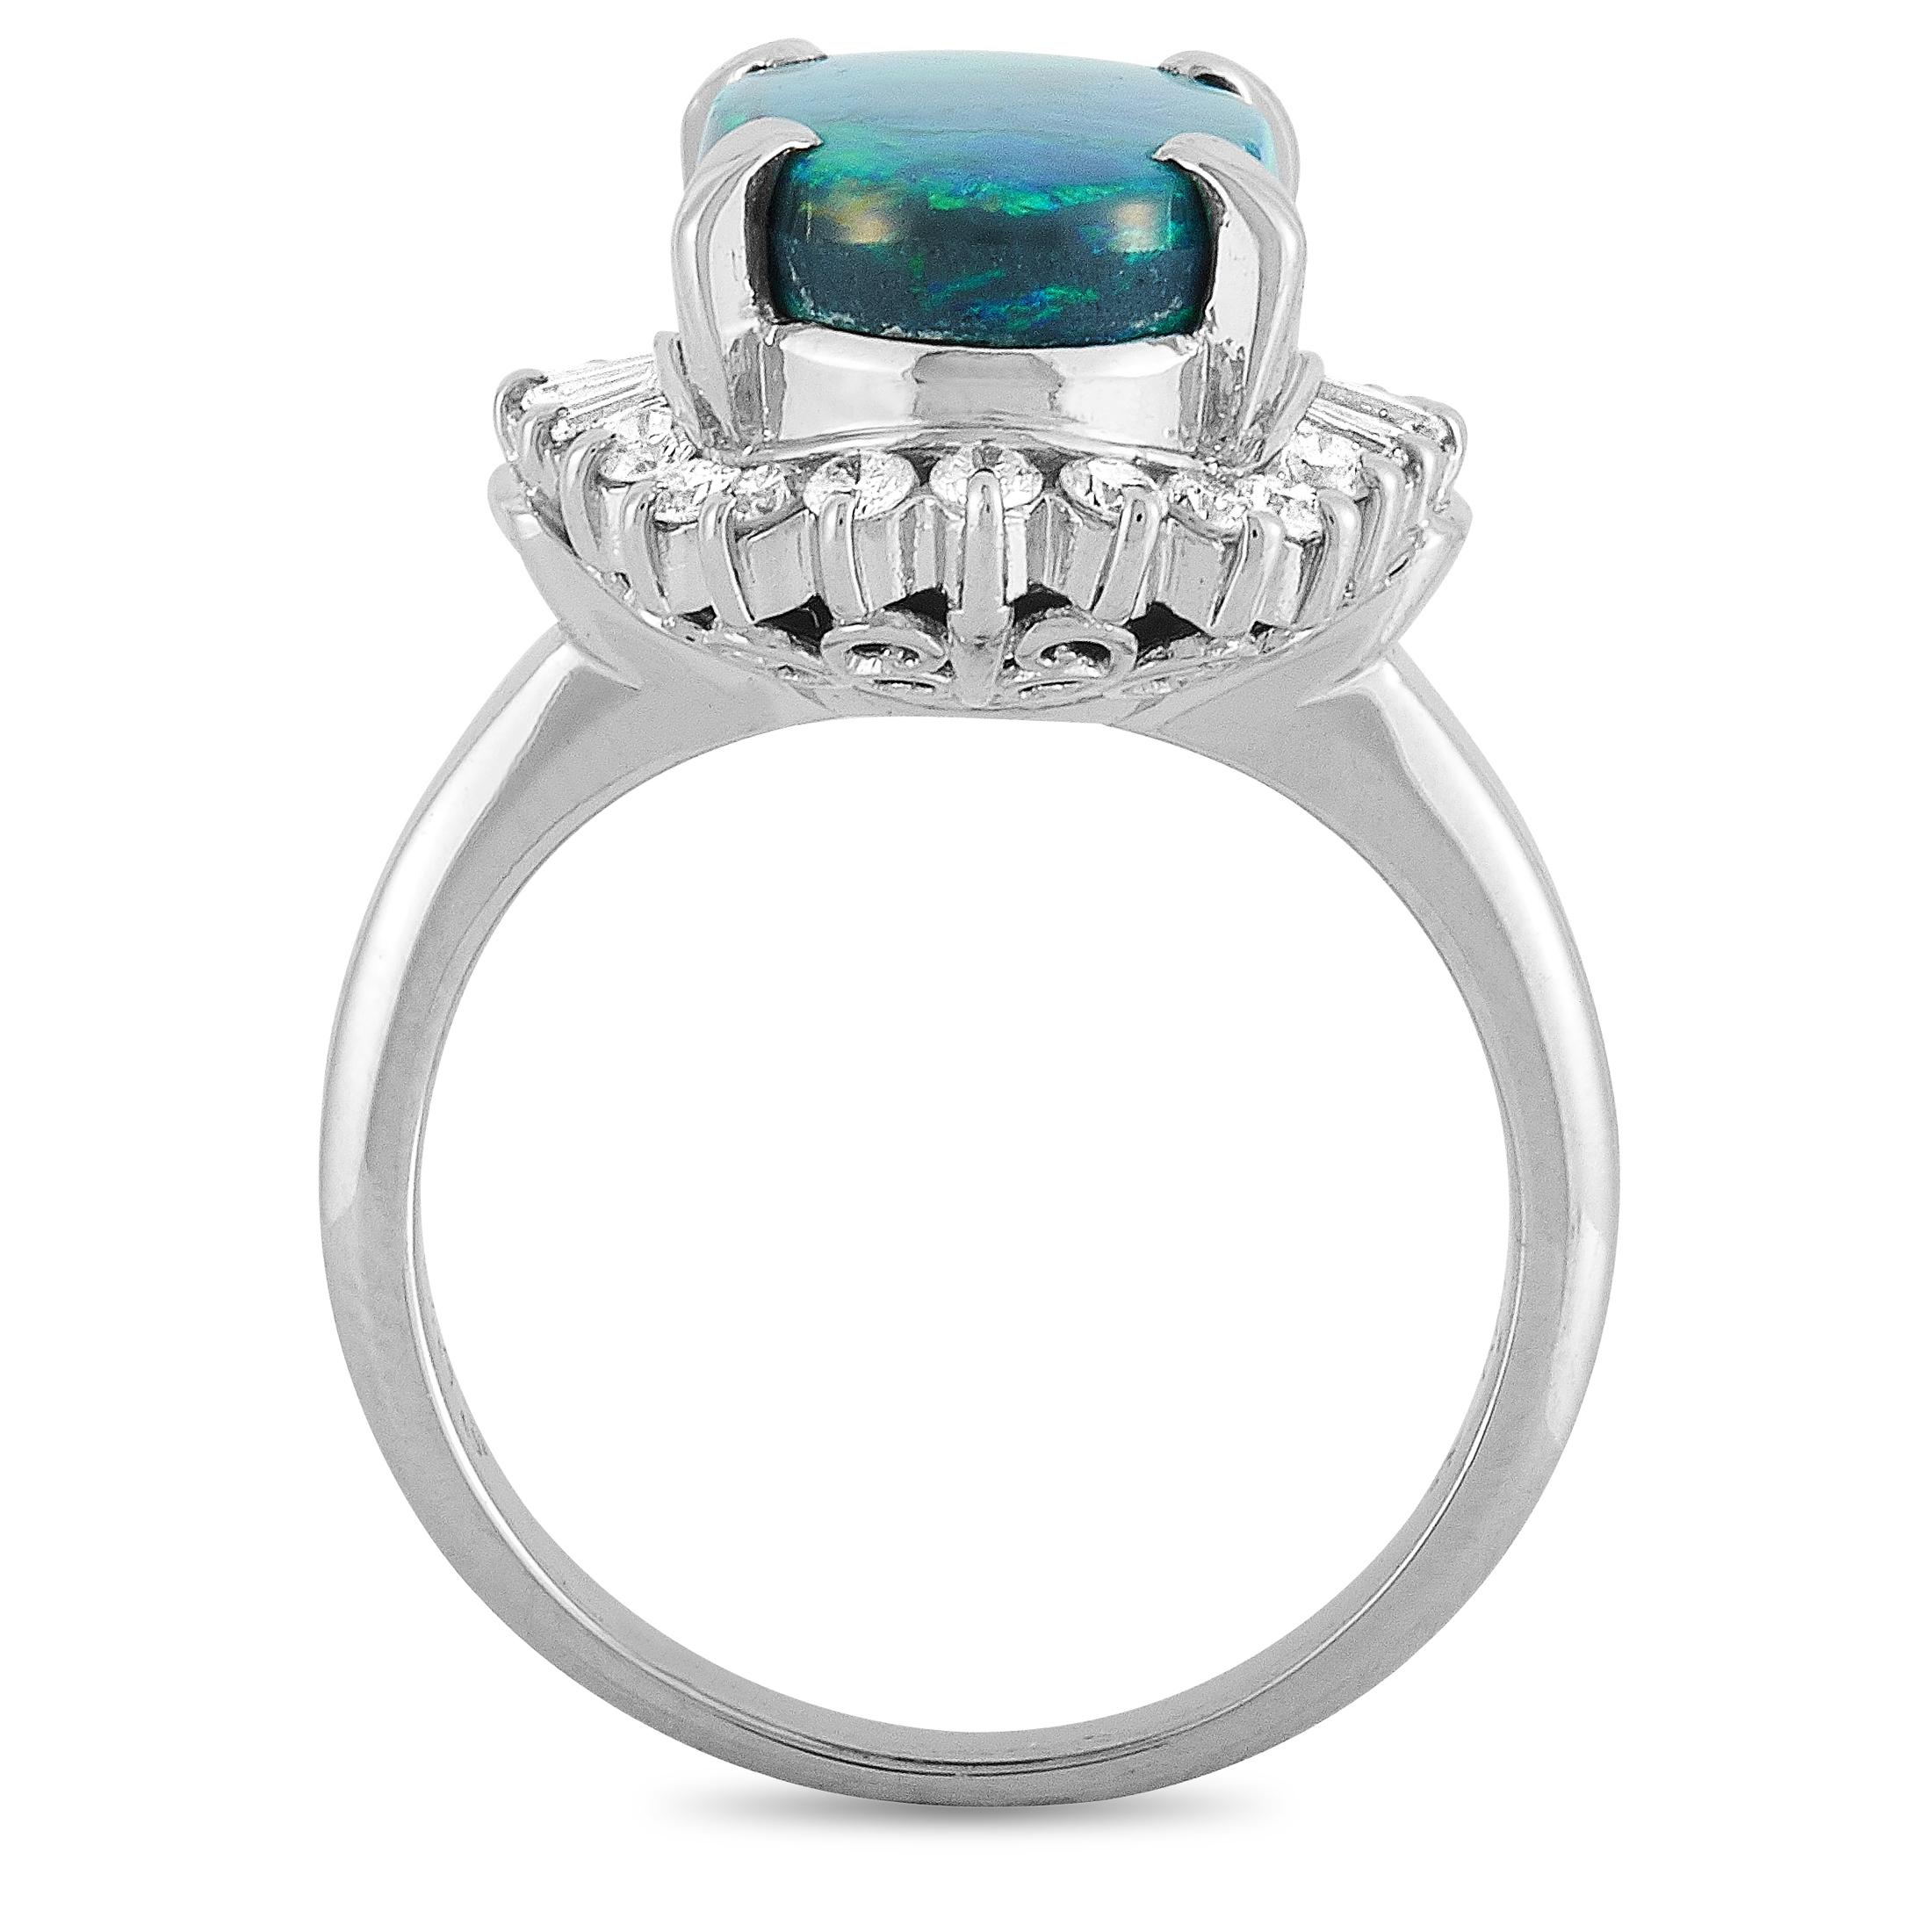 This LB Exclusive ring is crafted from platinum and weighs 9.7 grams. It is set with an opal that weighs 3.64 carats and a total of 0.53 carats of diamonds. The ring boasts band thickness of 3 mm and top height of 9 mm, while top dimensions measure